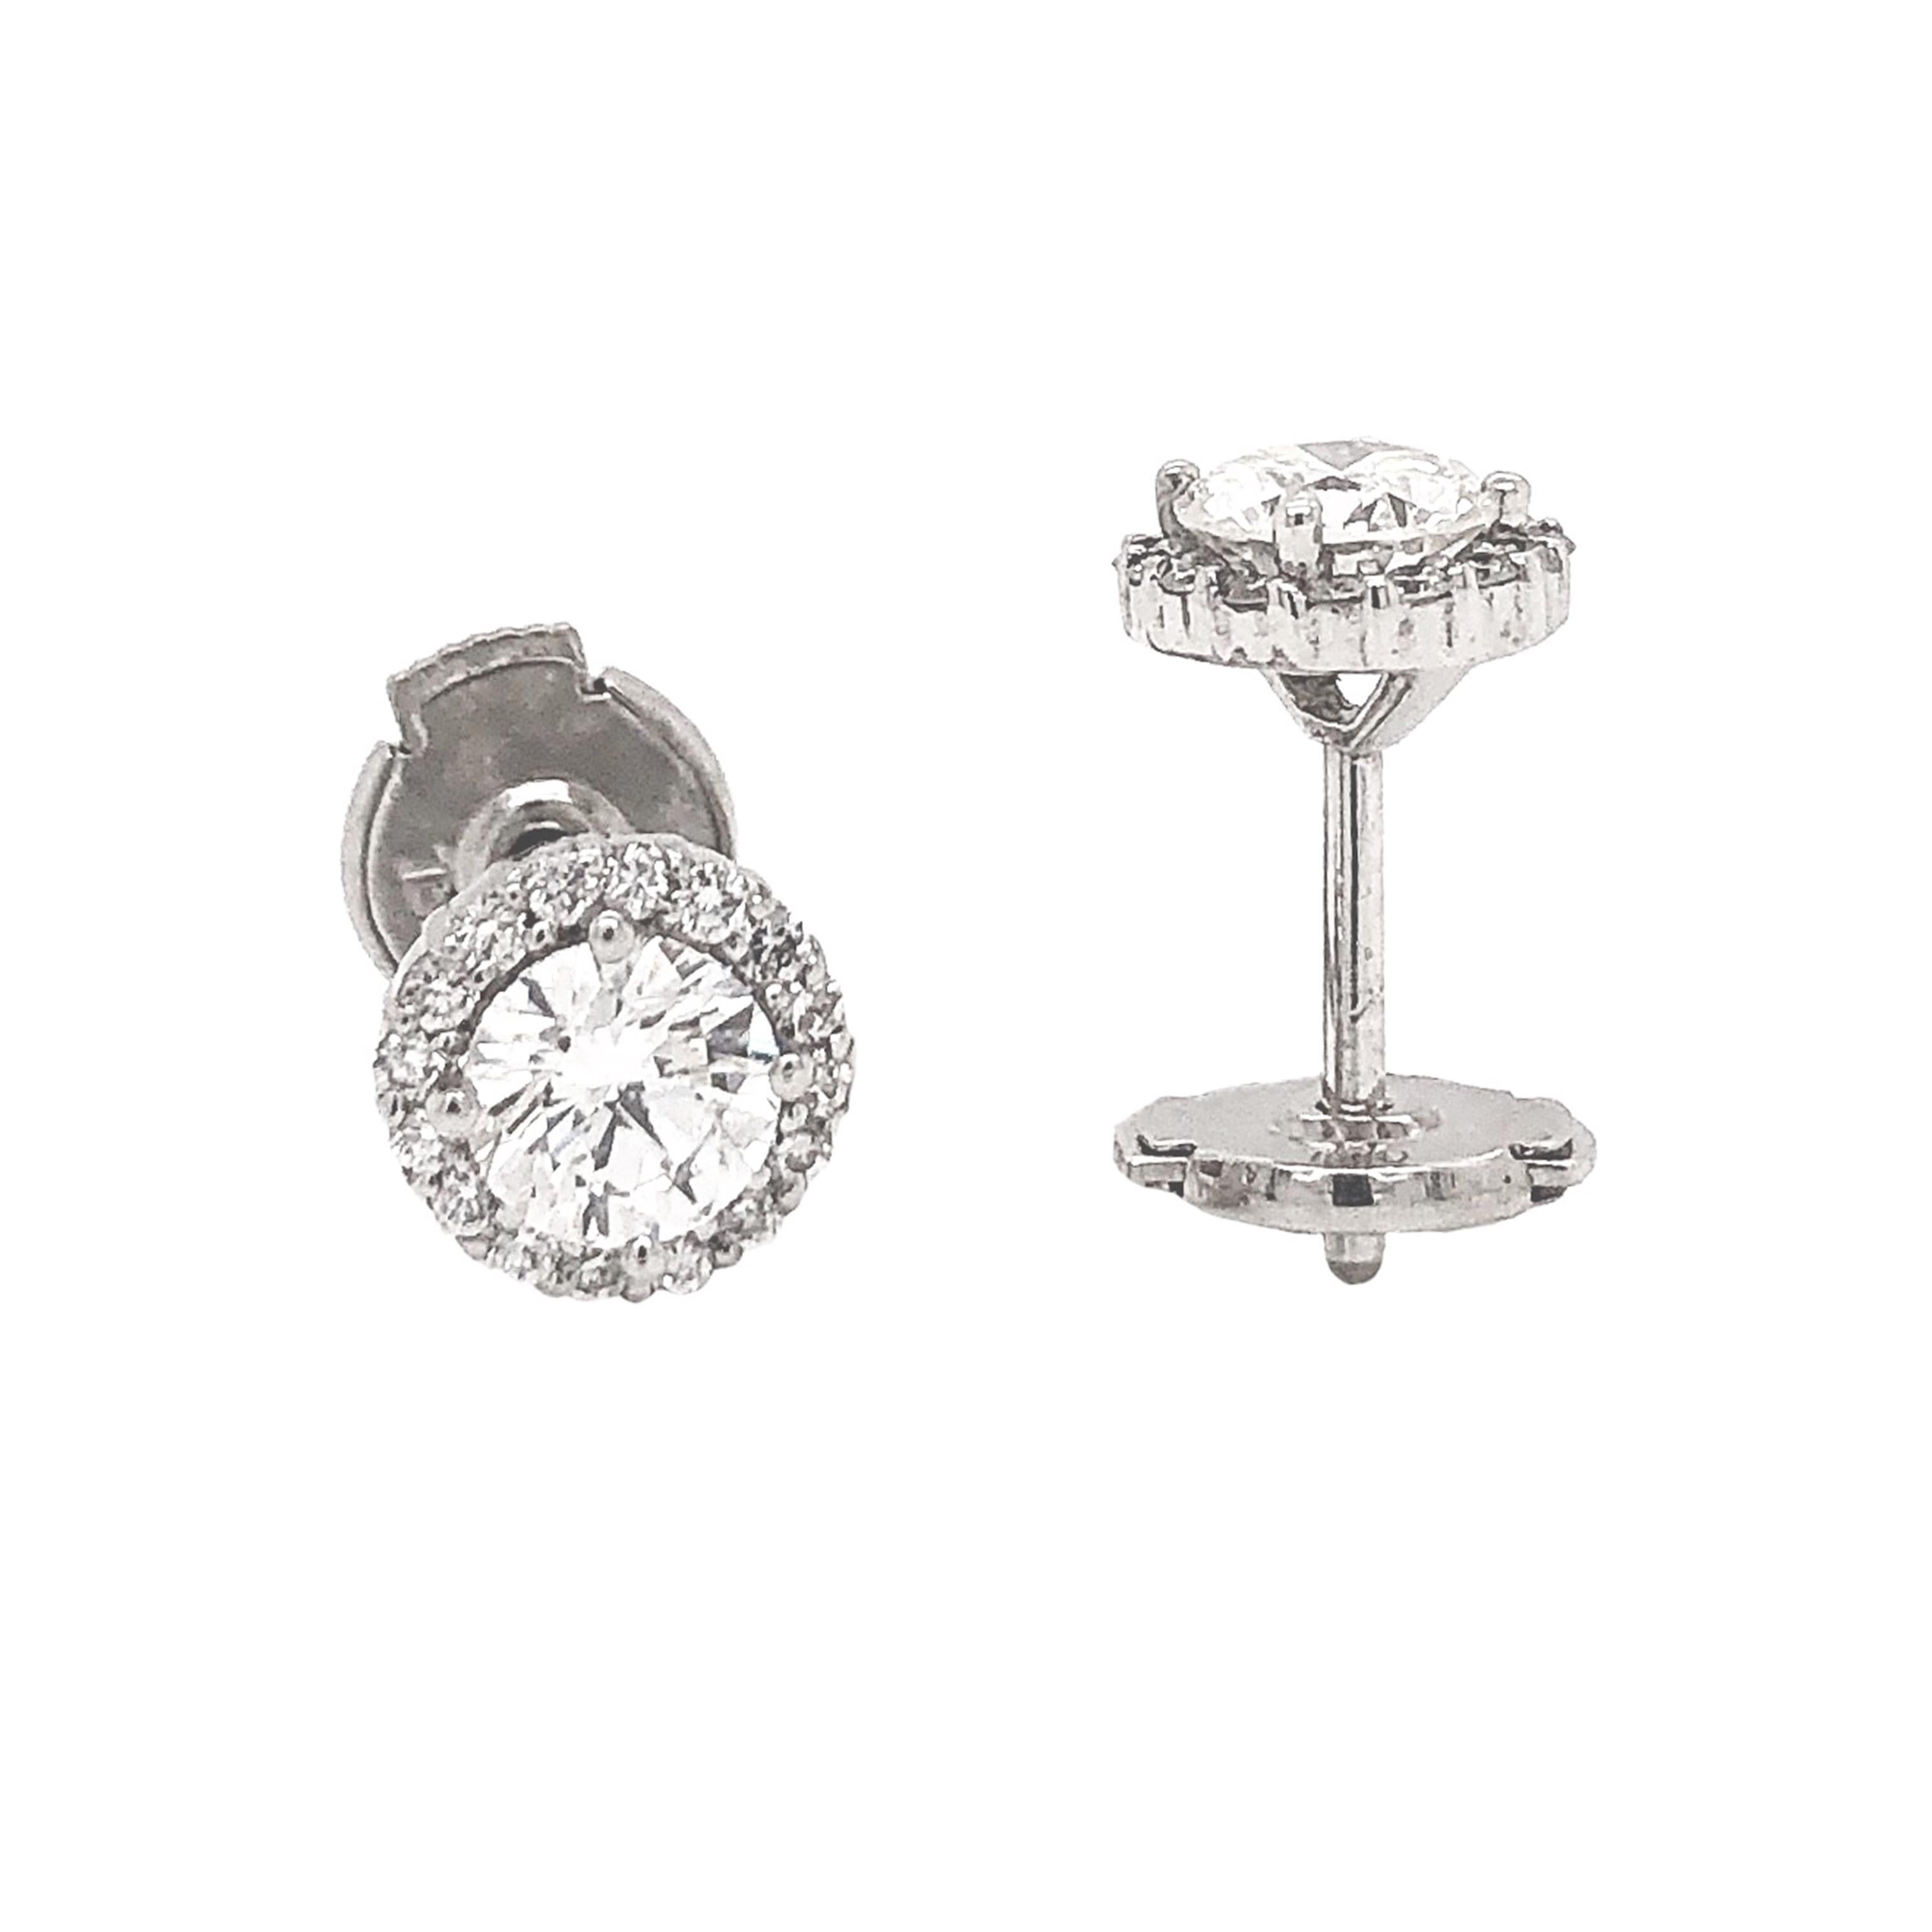 Halo Stud Round Brilliant Cut Diamond Earrings 0.85 cts t.w. 18K White Gold

18K White Gold Diamond stud Earrings 2 large Center Stones in the middle of the earring 2 = 0.67ct t.w. Brilliant-

Additional Information:
cut round G in color SI 1 in